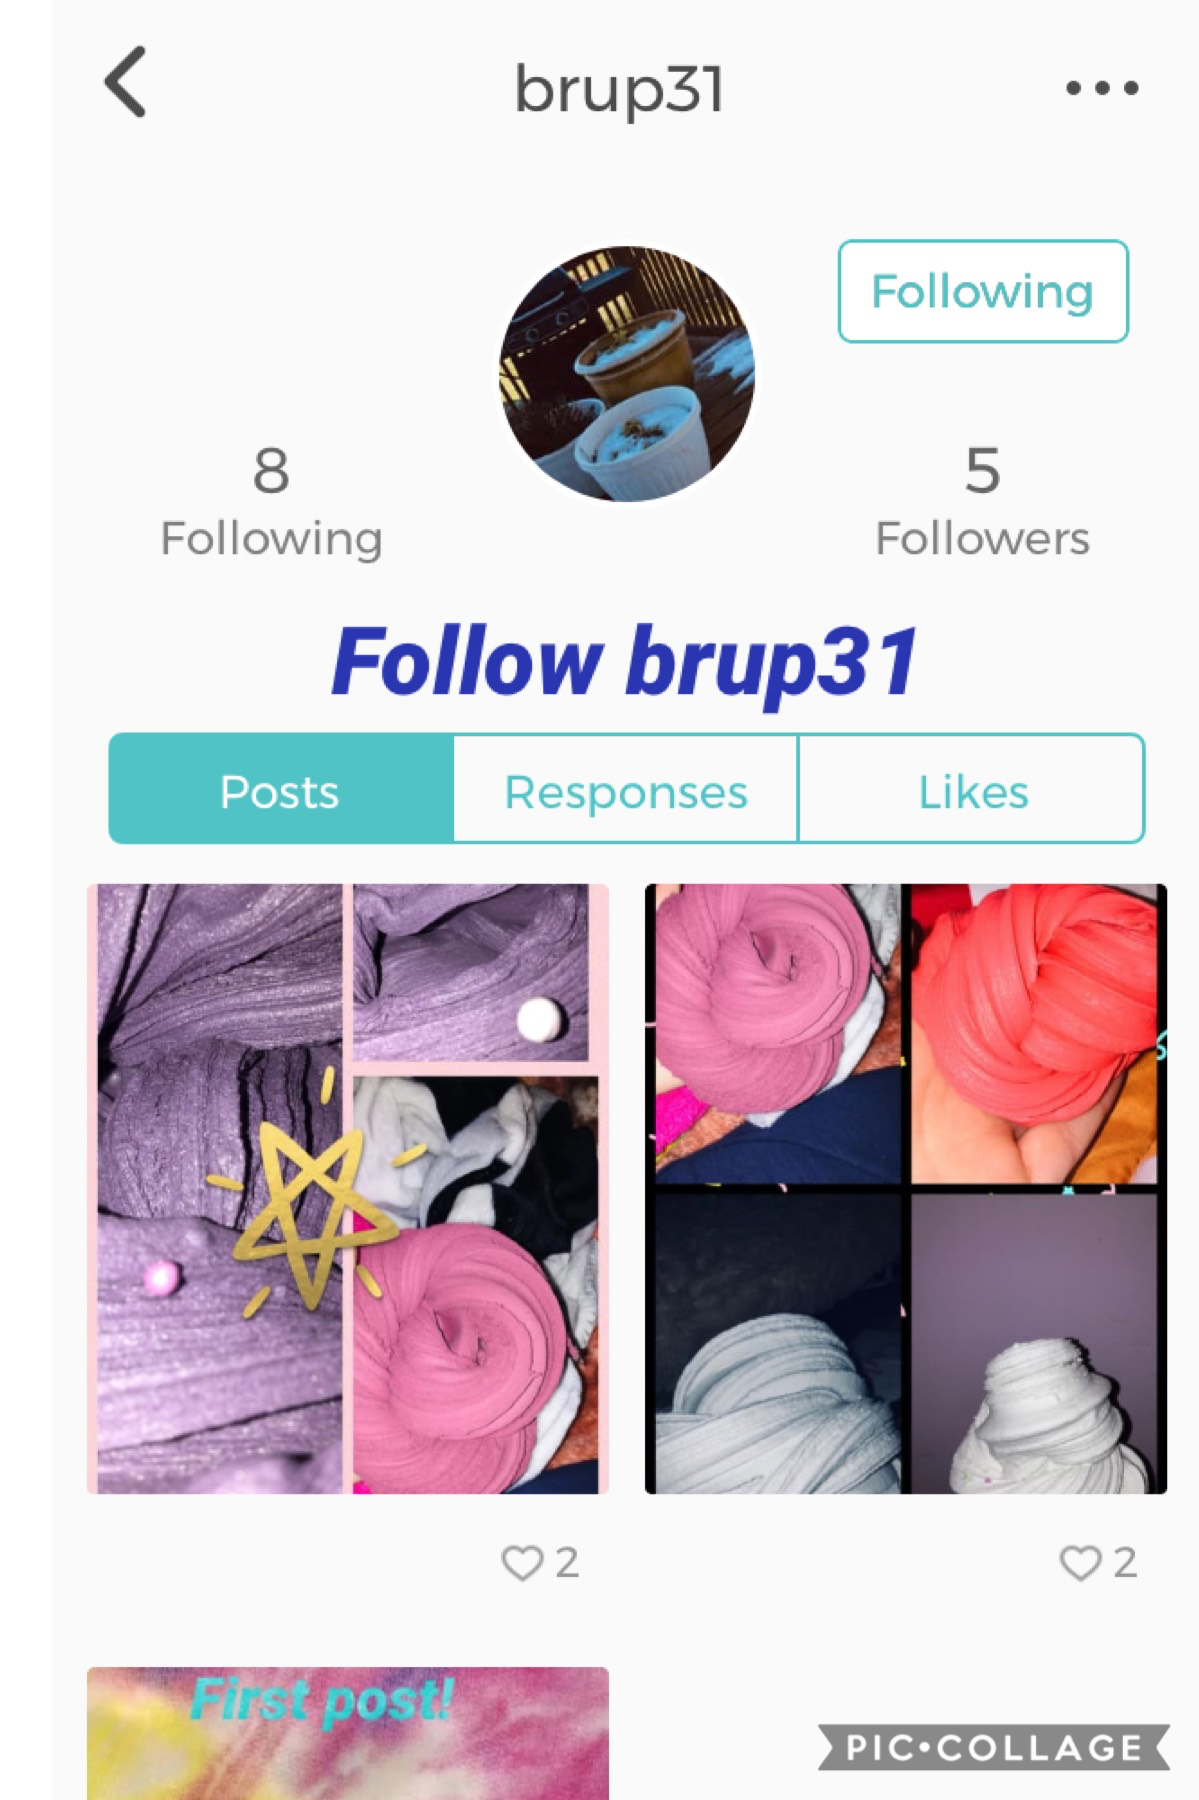 Follow brup31!

Comment silly billy on my last post for shoutout on my next post!! 